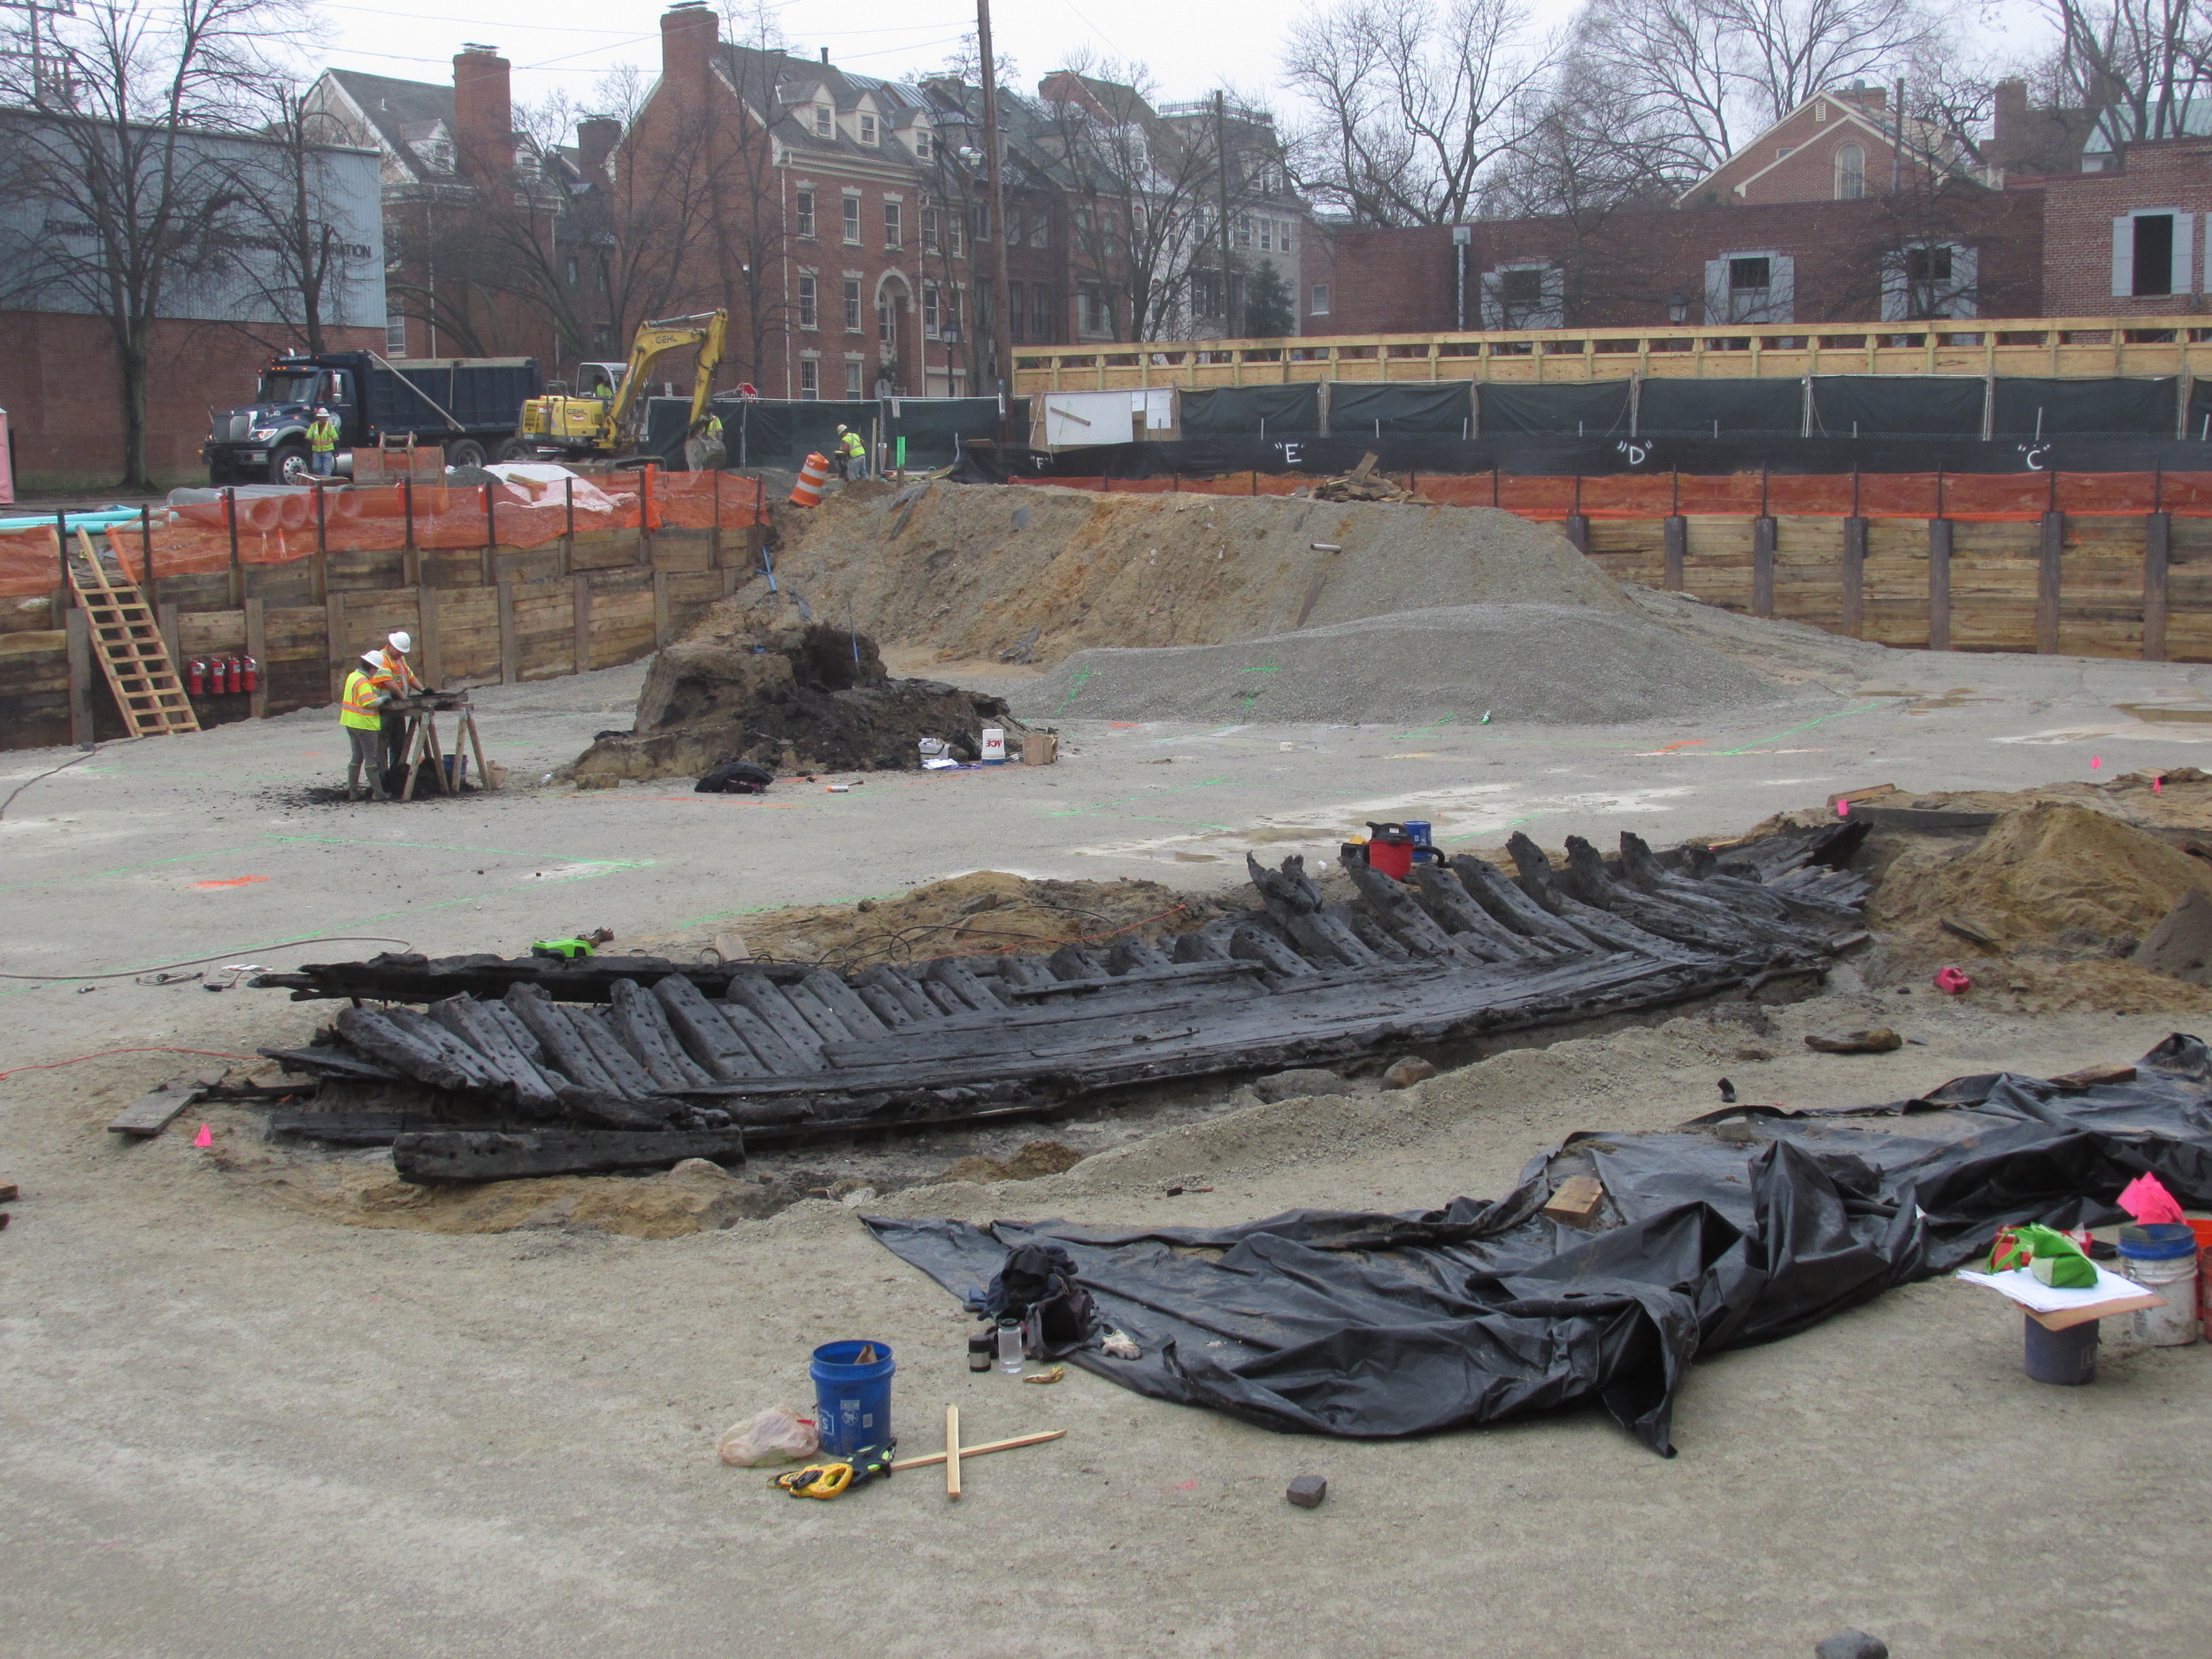  Just beyond the recovered 18th-century ship’s hull, WSSI archeologists excavate an 18th-century privy.    